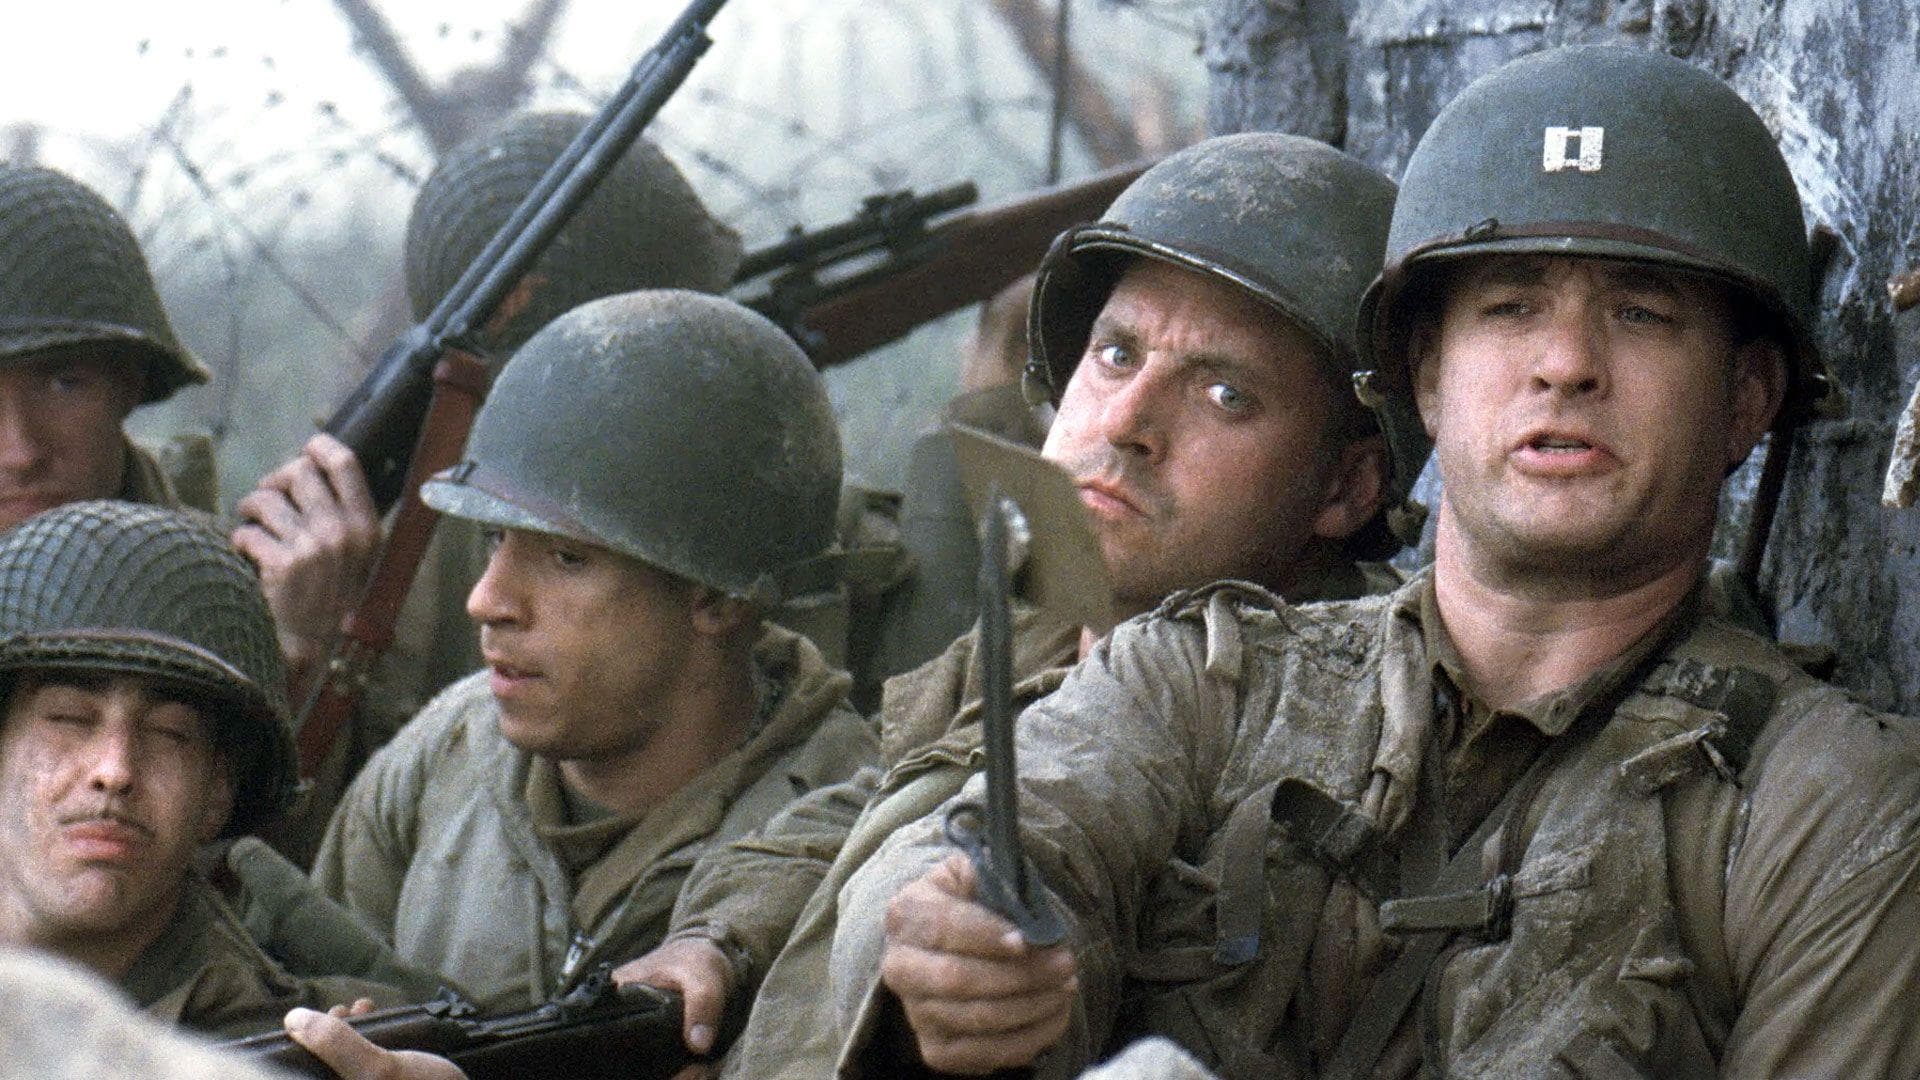 Random Dumbest Things Movies Have Us Believe About WWII